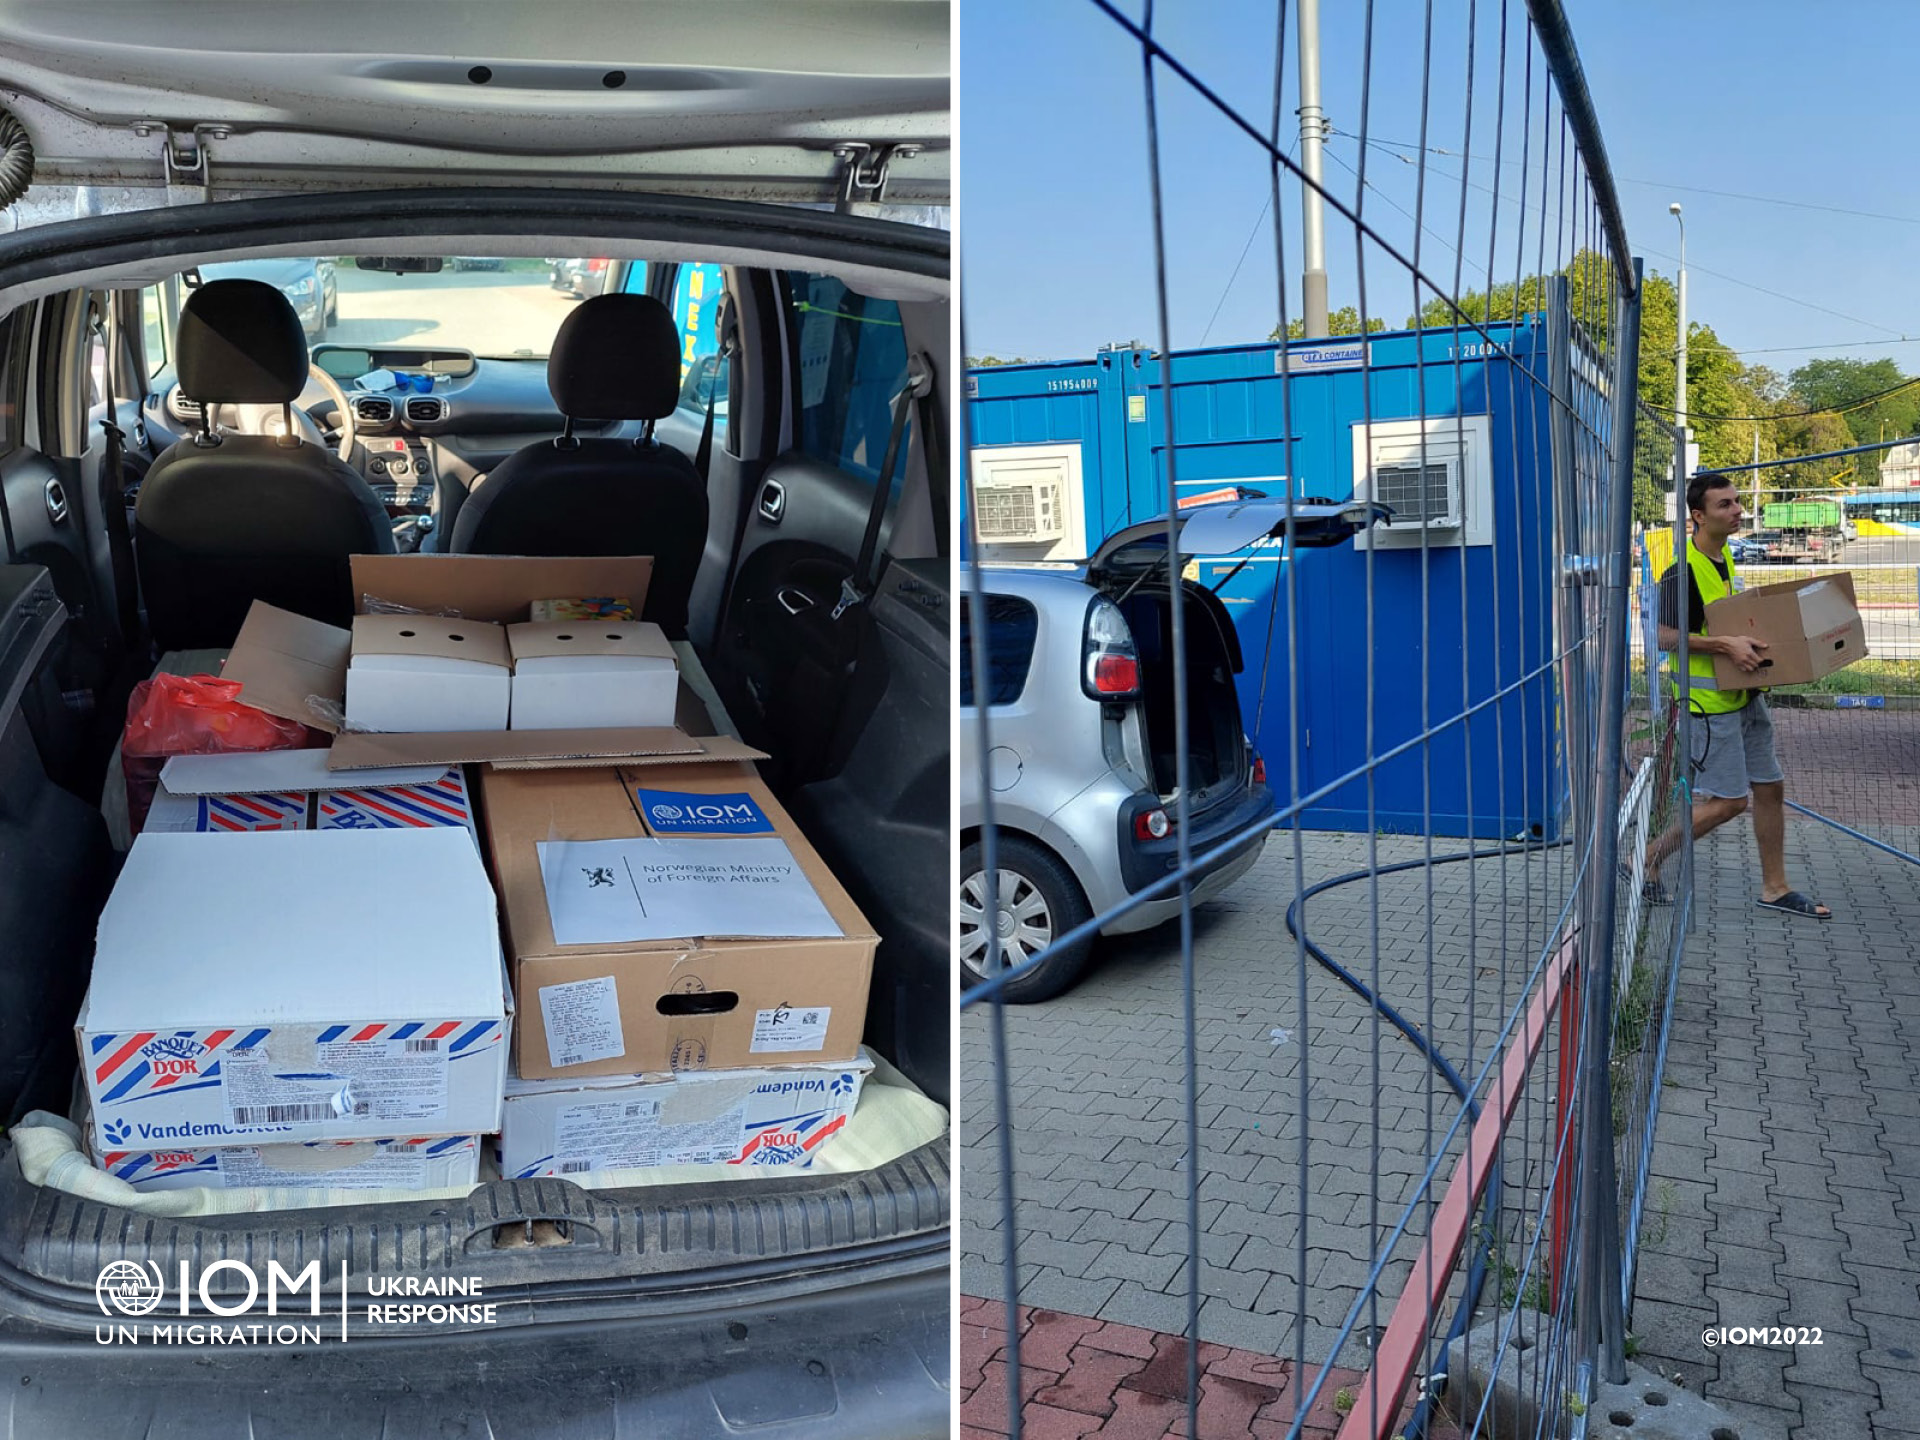 IOM secures delivery of food for the City of Kosice hotspot. Photo © International Organization for Migration (IOM) 2022.